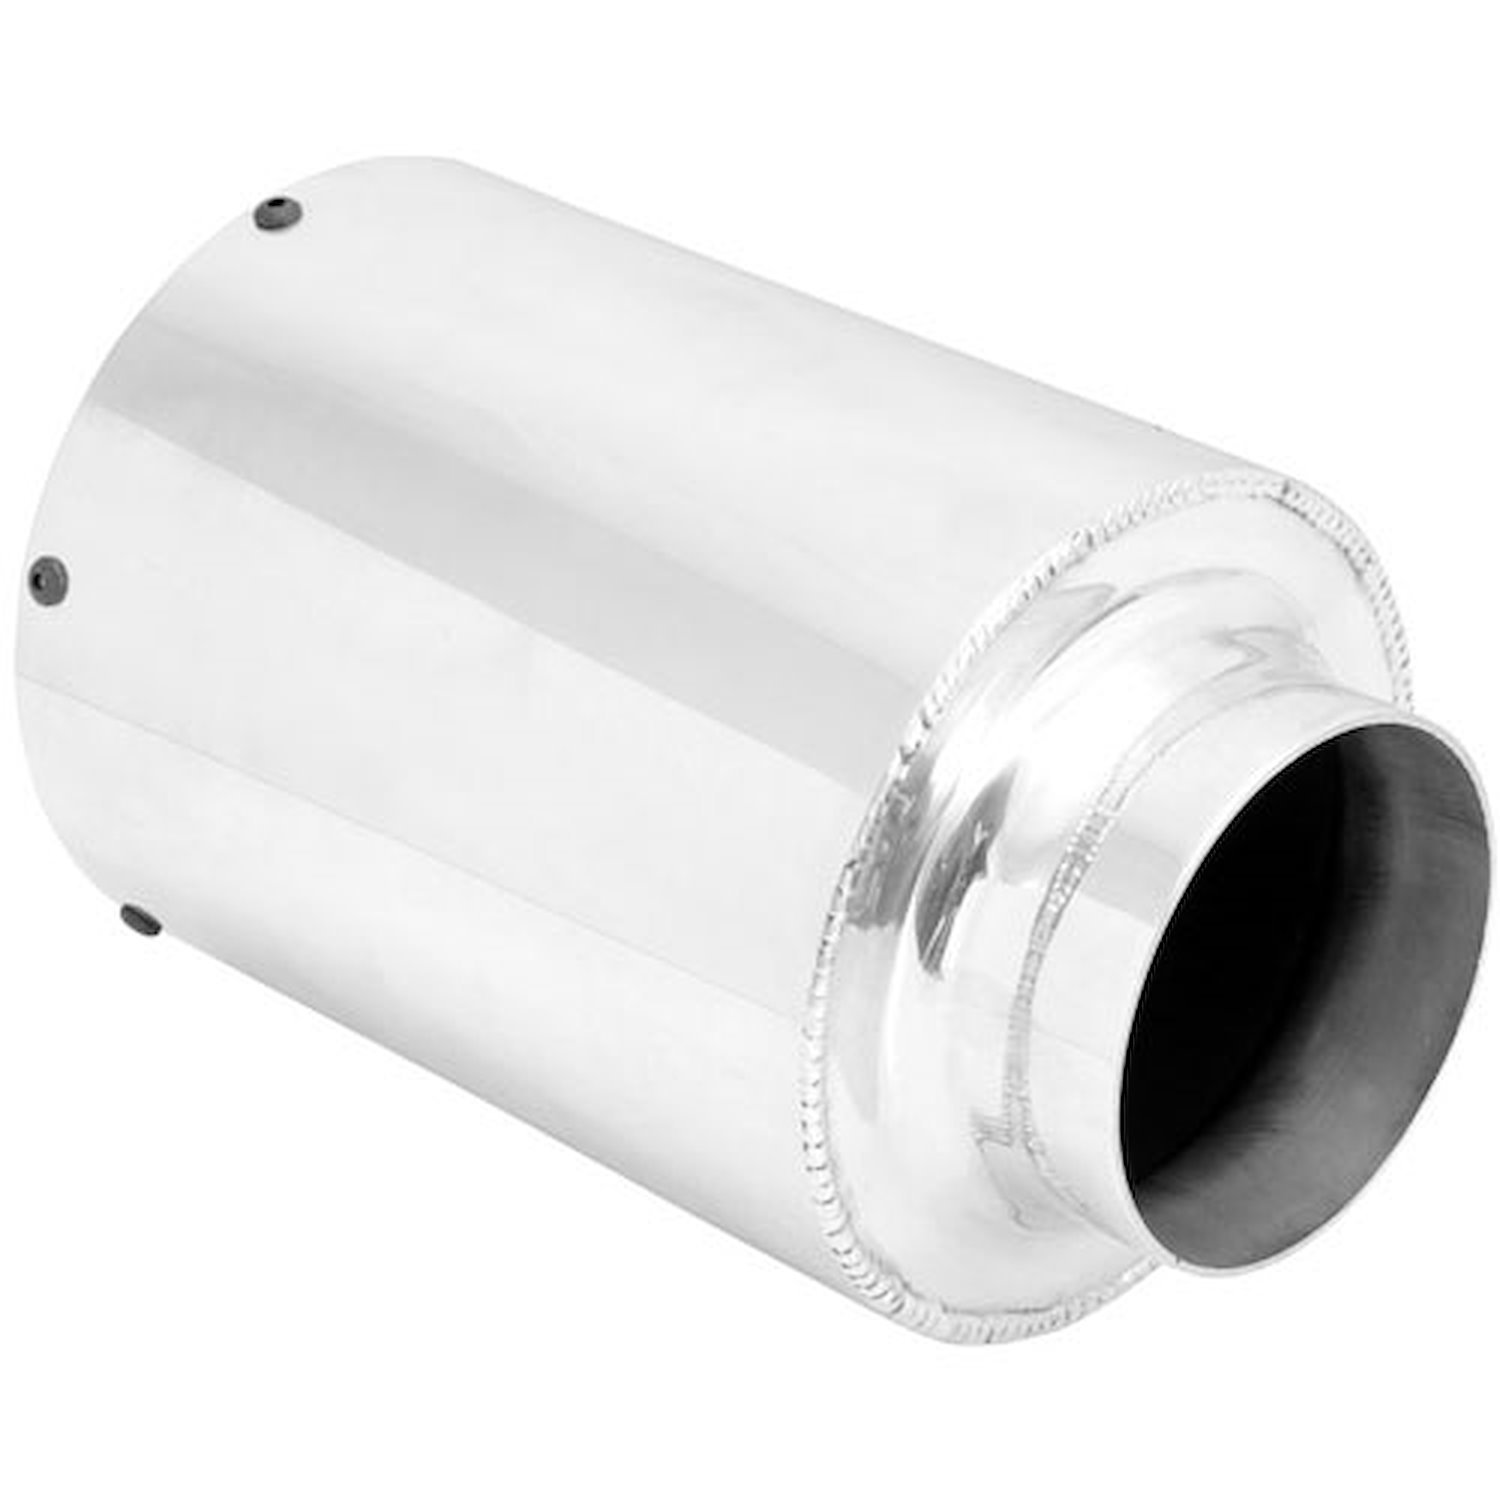 Inline Air Box Inlet/Outlet: 4"